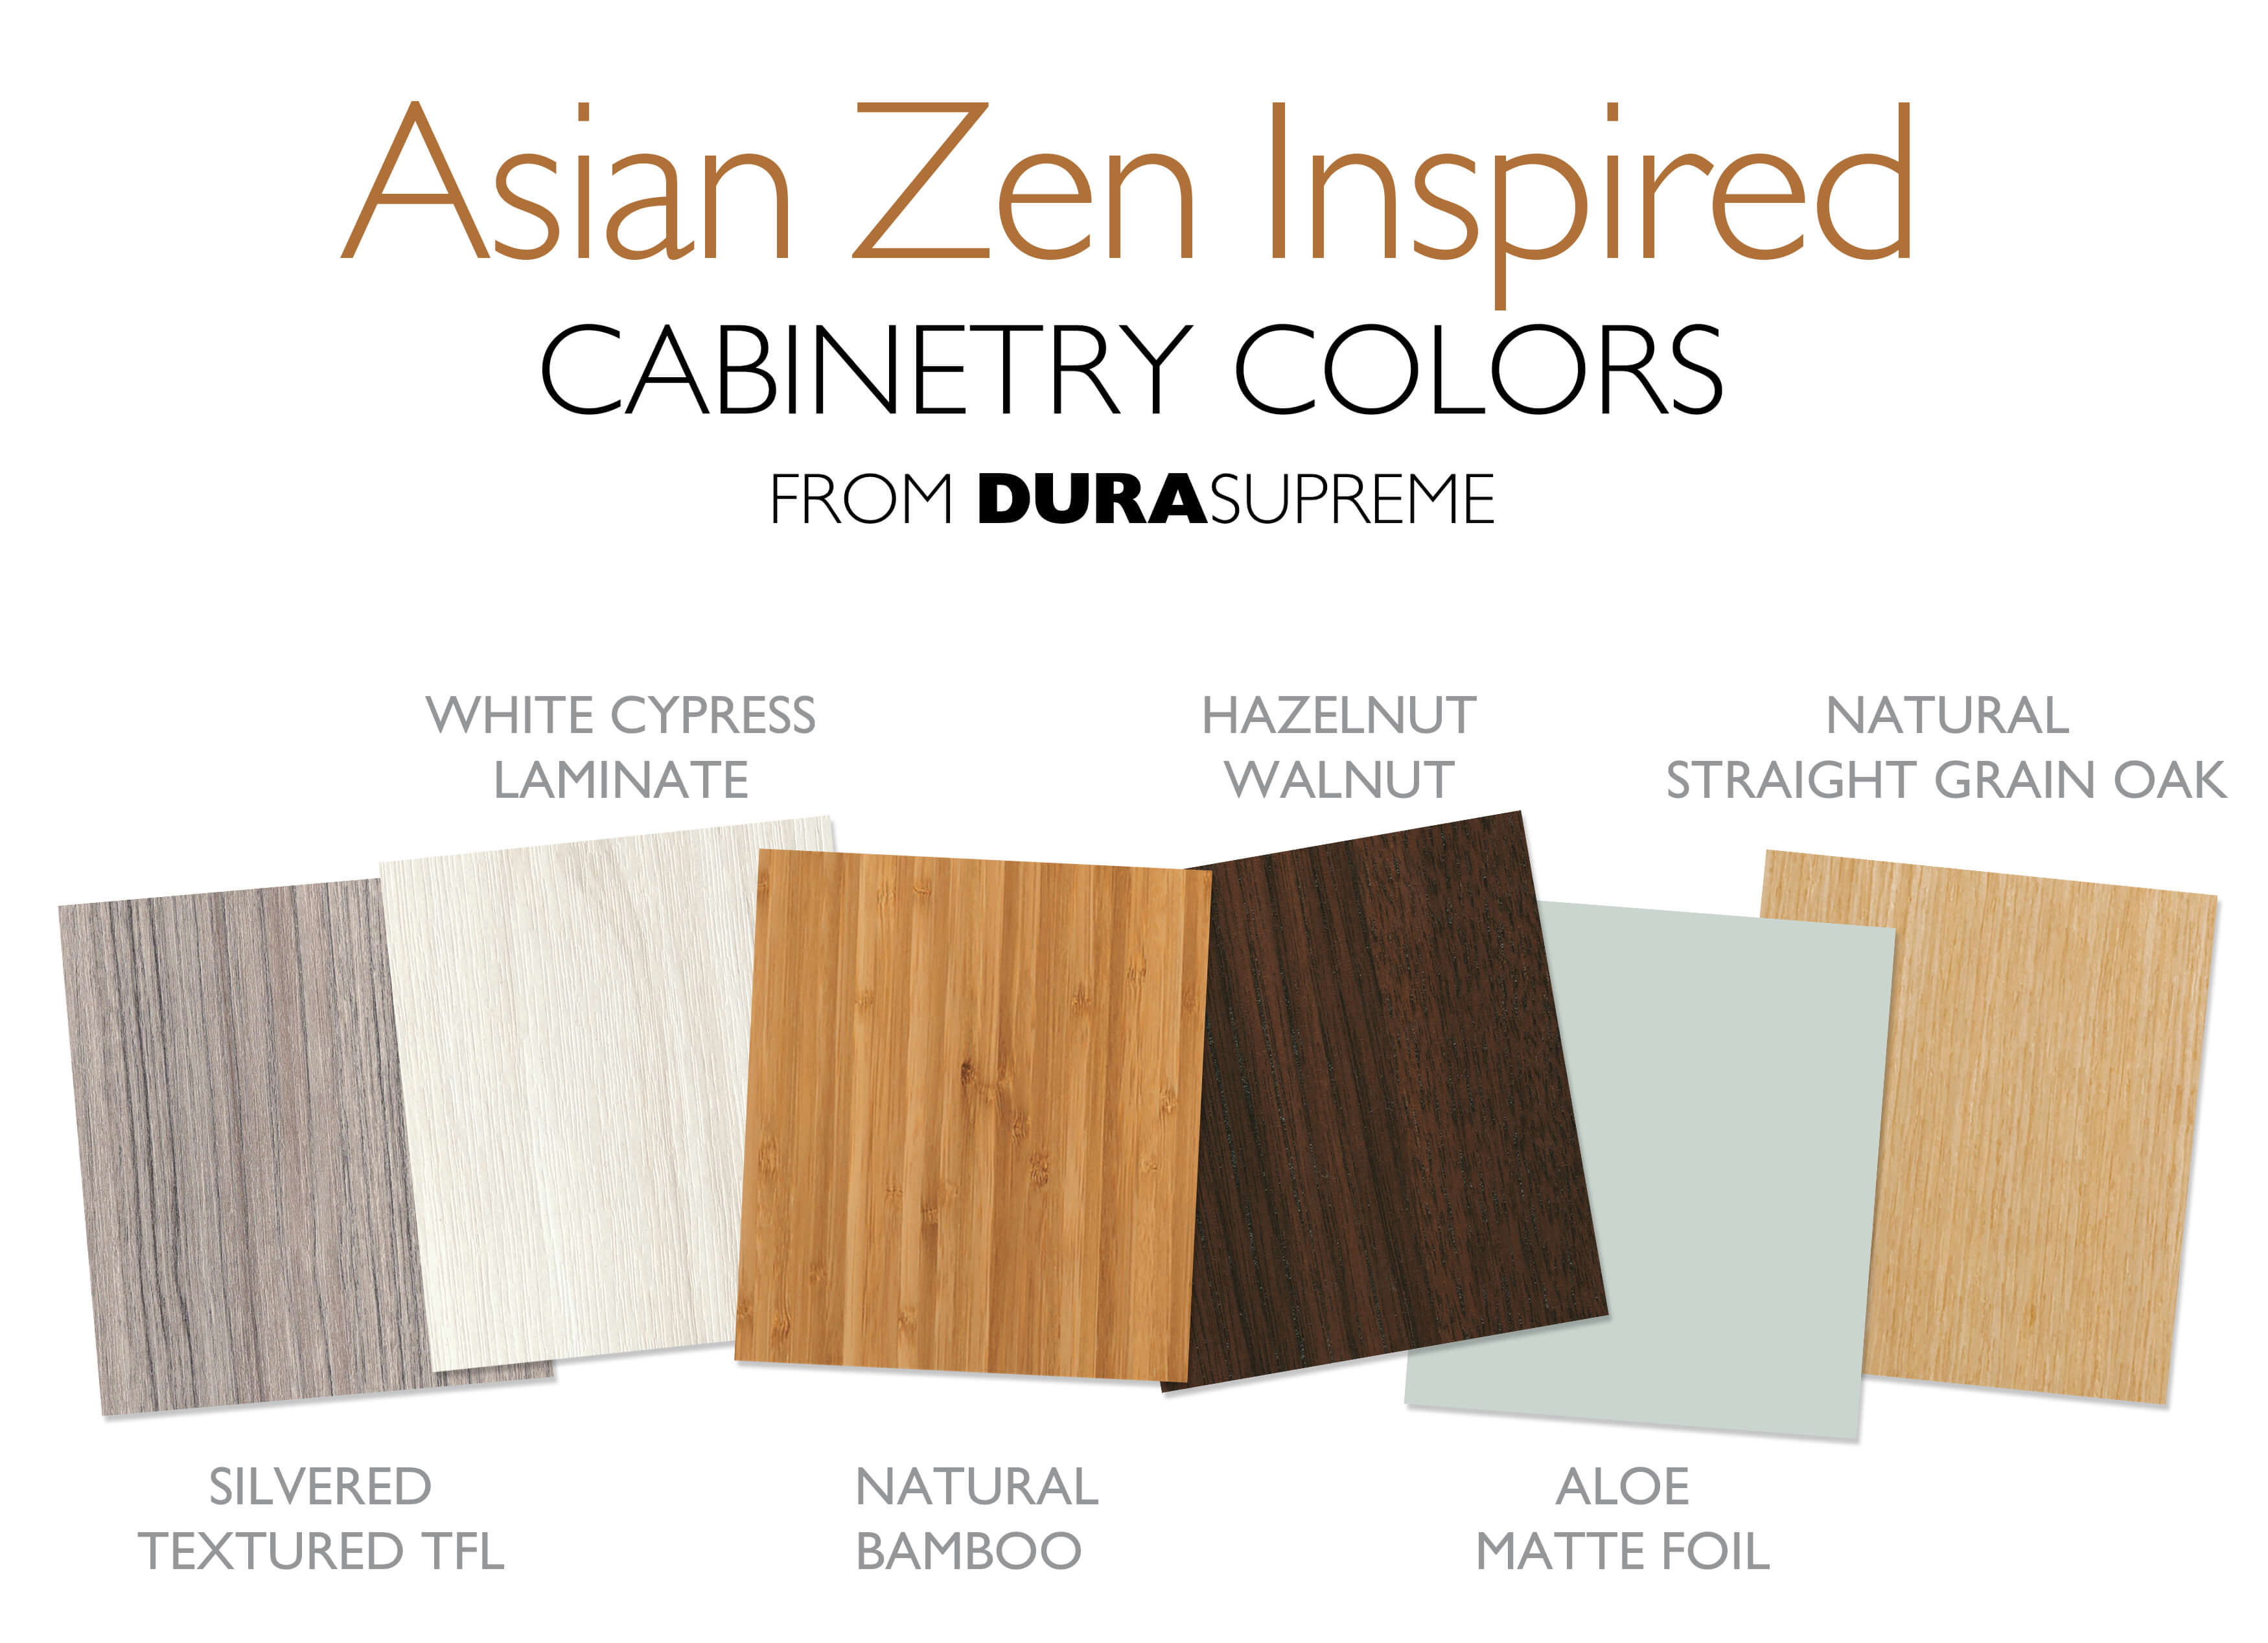 Dura Supreme Cabinetry finishes with an Asian Zen Style. Silvered Textured TFL, White Cypress Laminate, Natural Bamboo Exotic Veneer, Hazelnut Walnut, Aloe Matte Foil, Natural Straight Grain Oak.